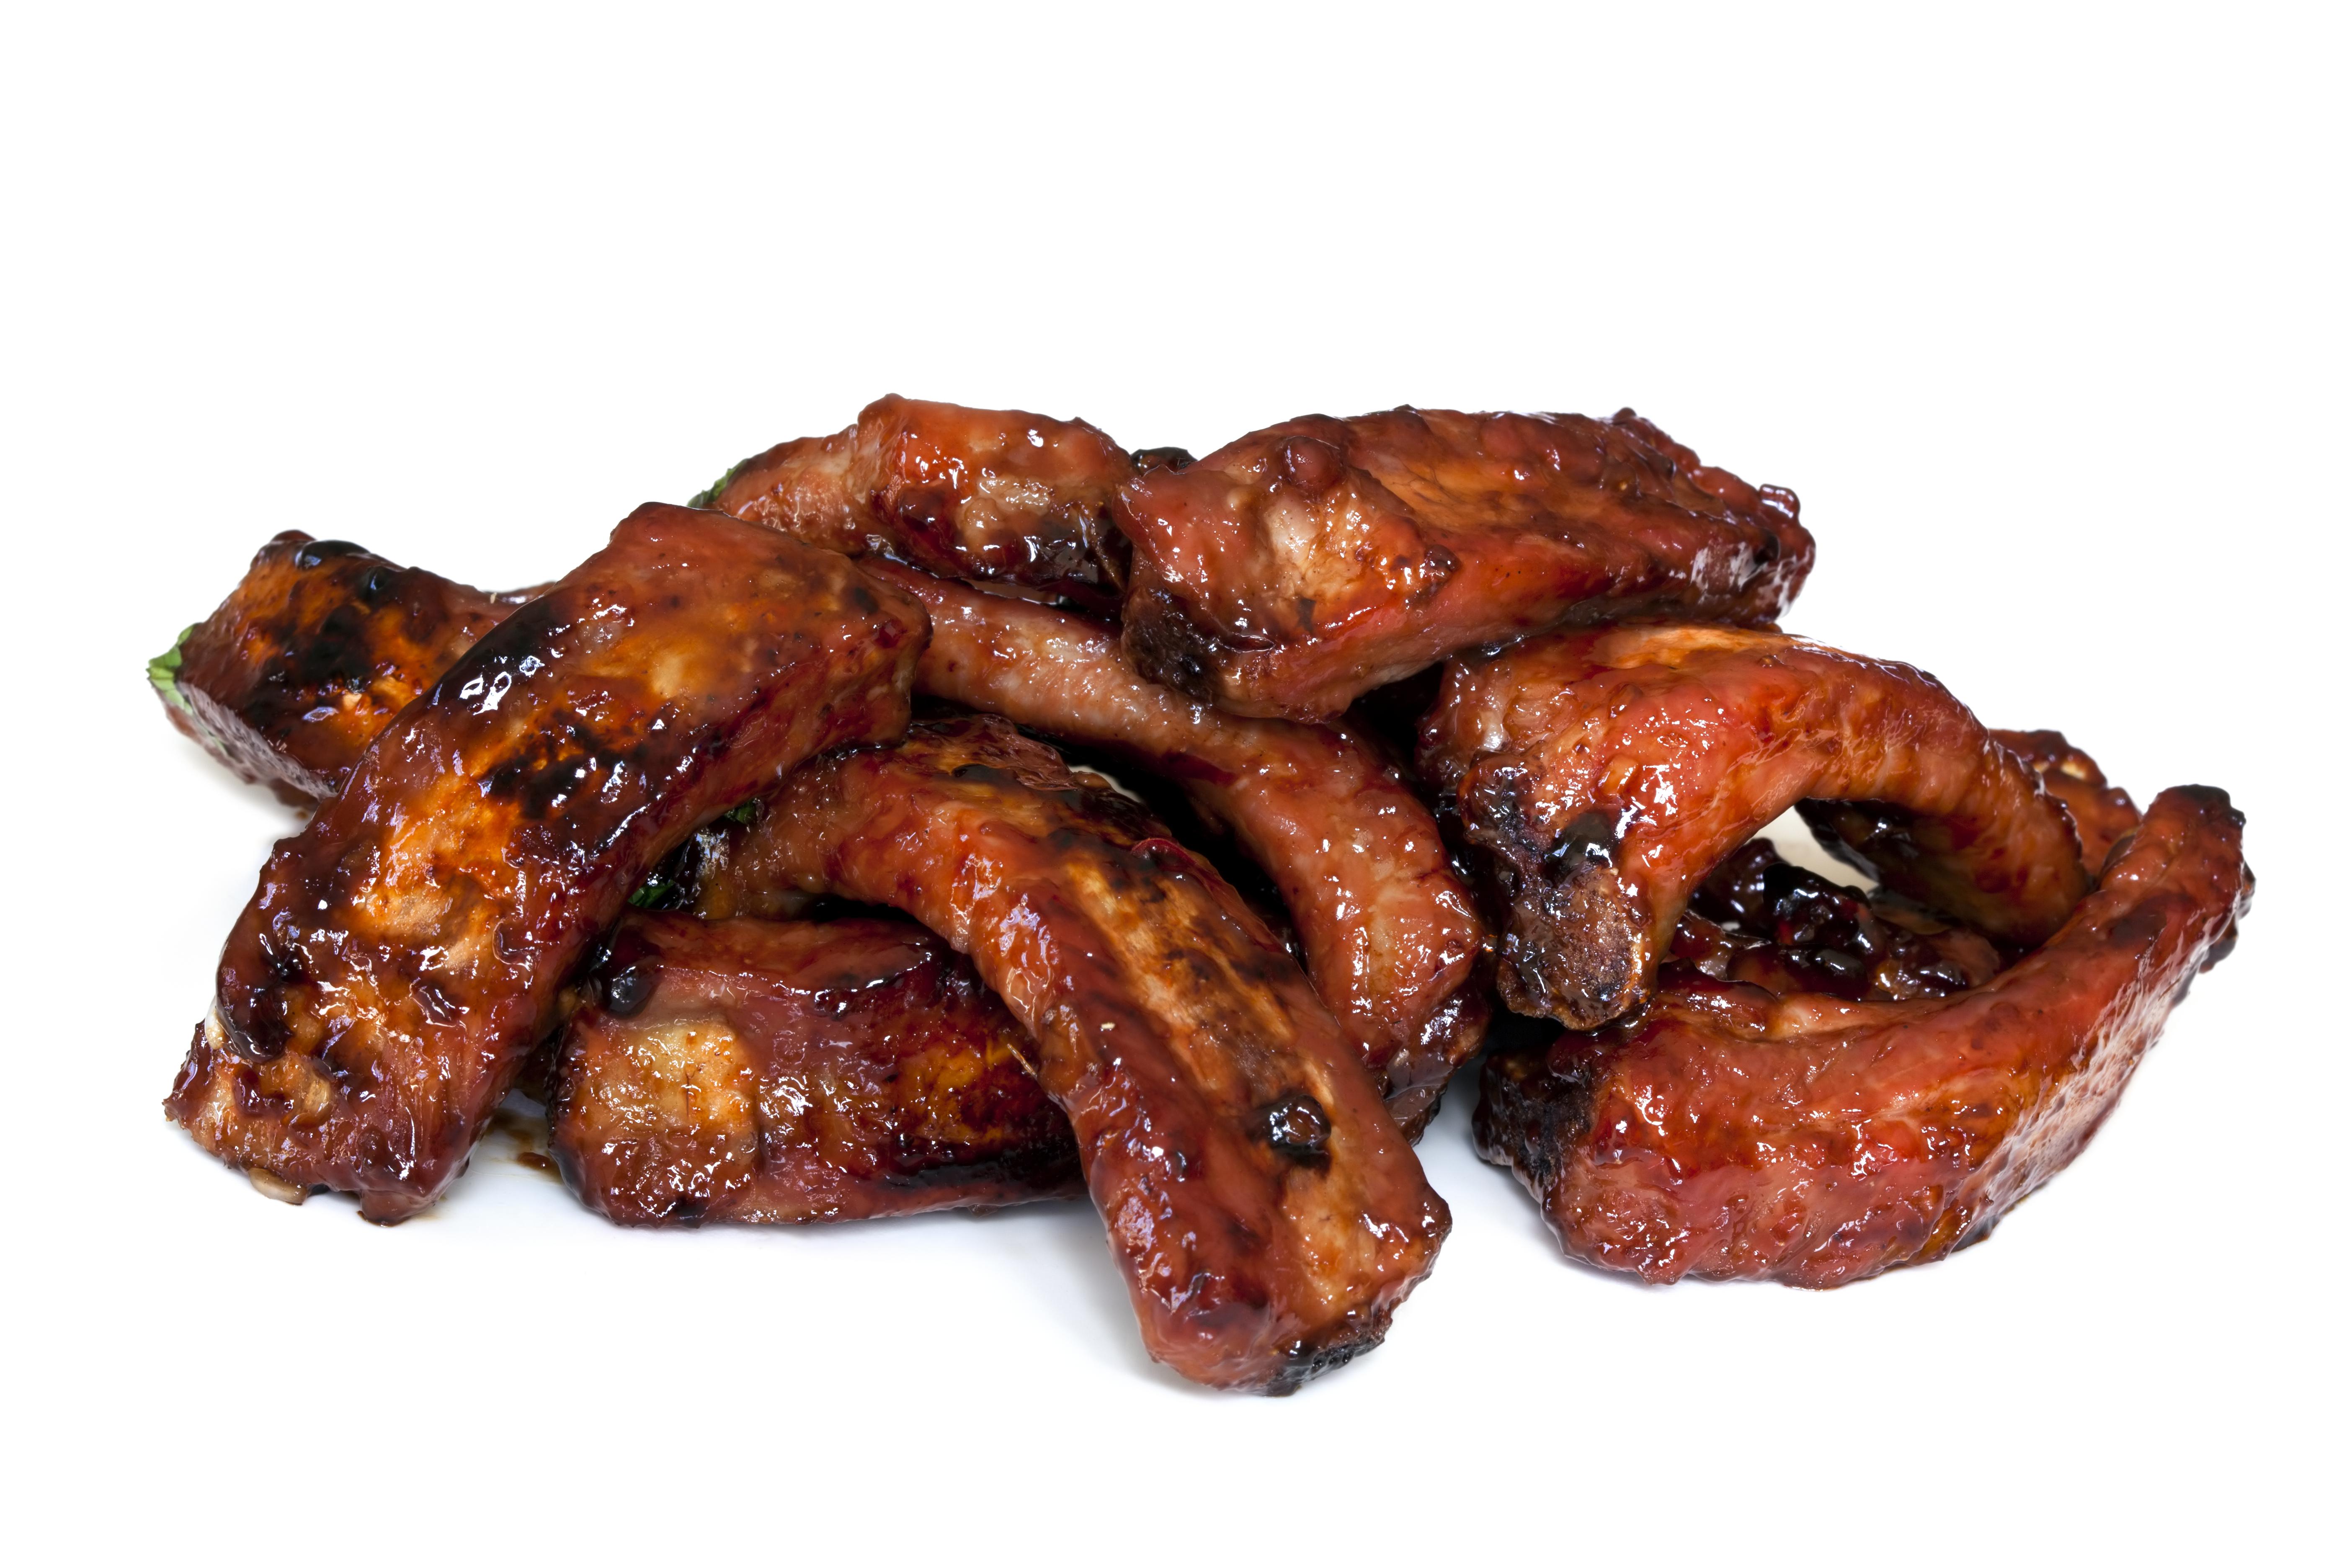 Pile of barbecued baby back pork ribs, isolated on white. Sticky and delicious!